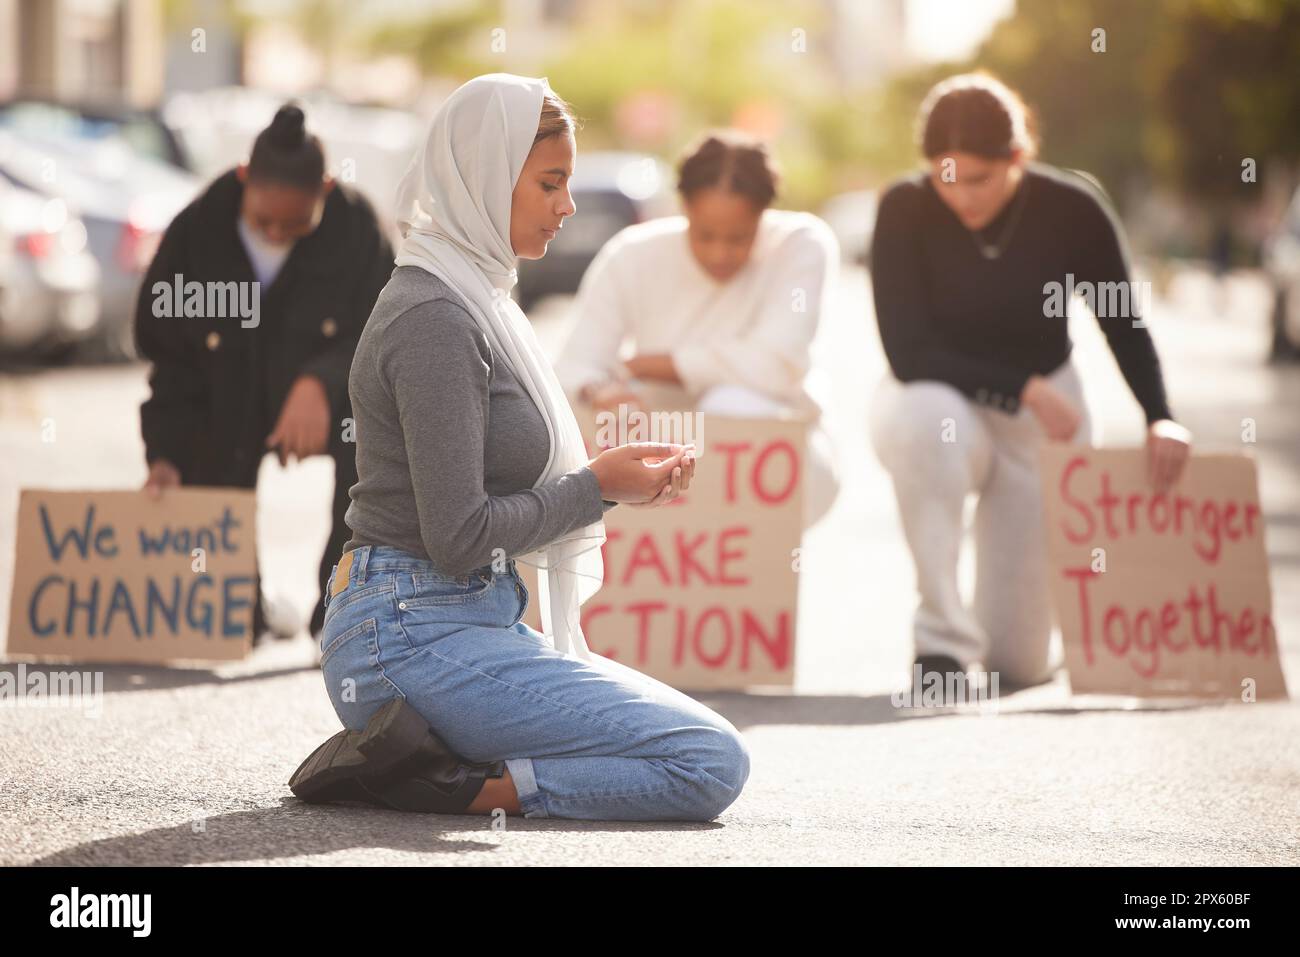 Protest, Islamic woman and pray in street, group and support for Palestine. Muslim female, girl or protesters with cardboard signs, fight for justice Stock Photo